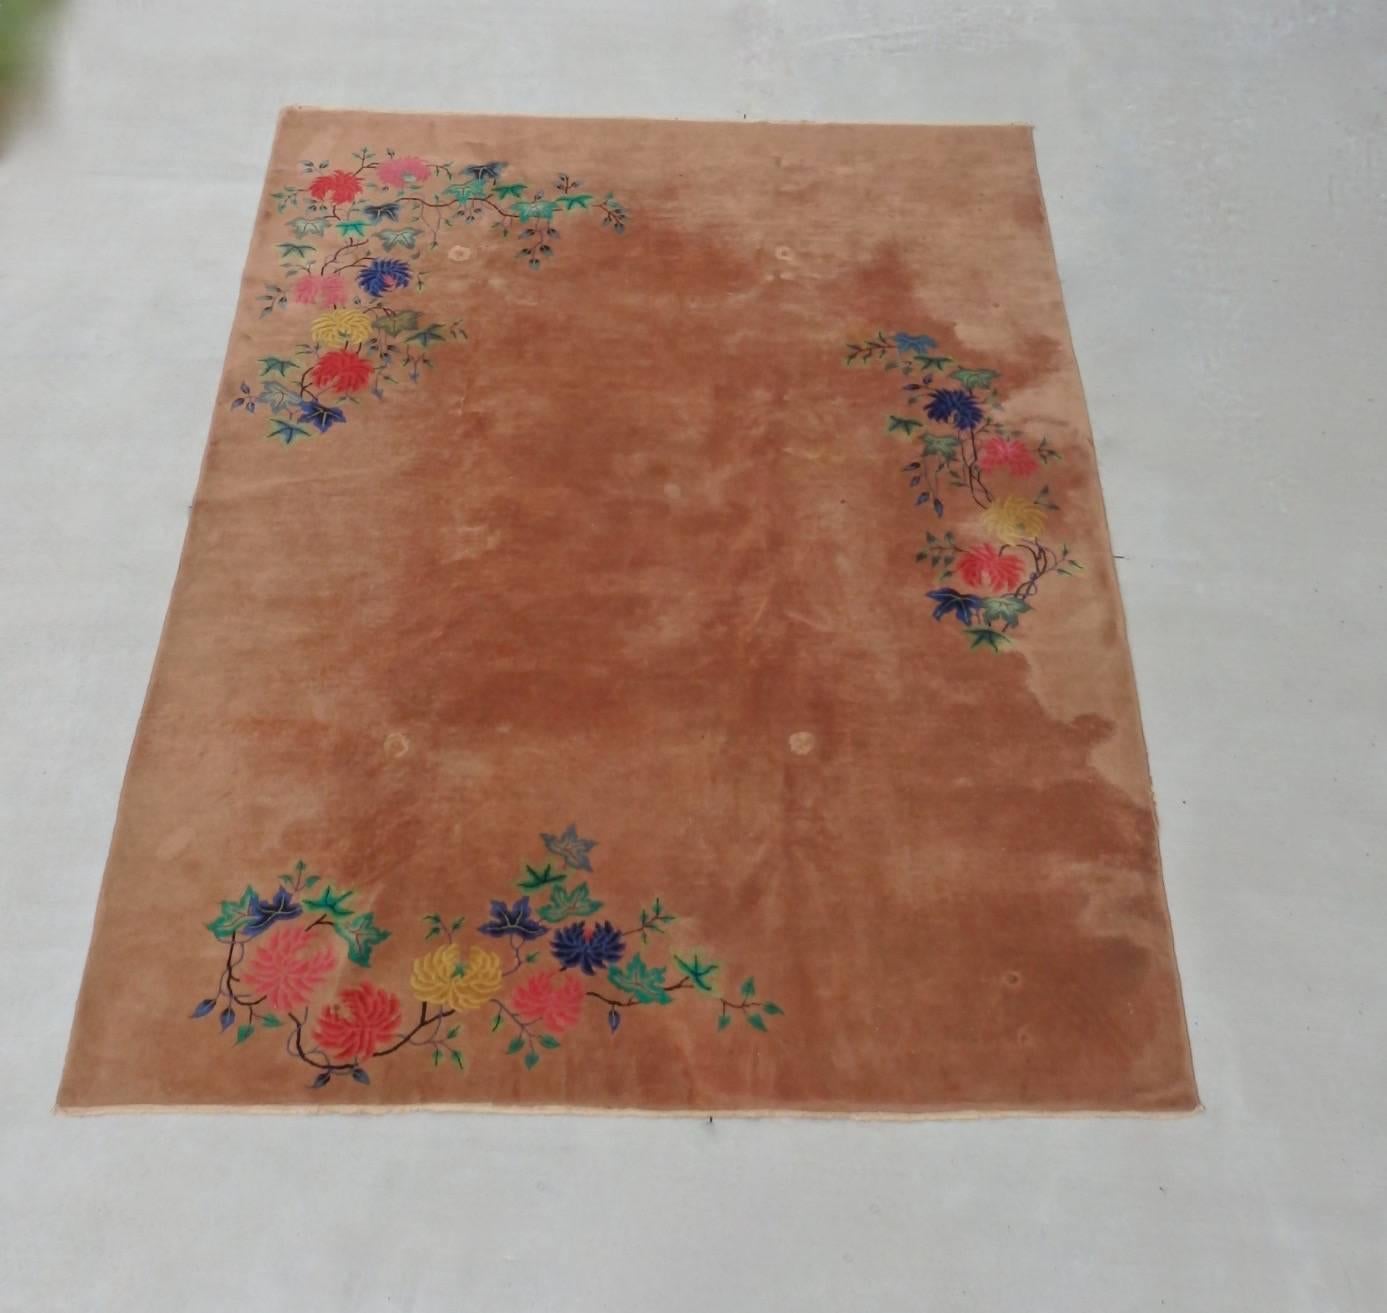 Large Art Deco rug with floral motif on rare Mink tone field. Fresh from an estate table leg imprints are still fresh.